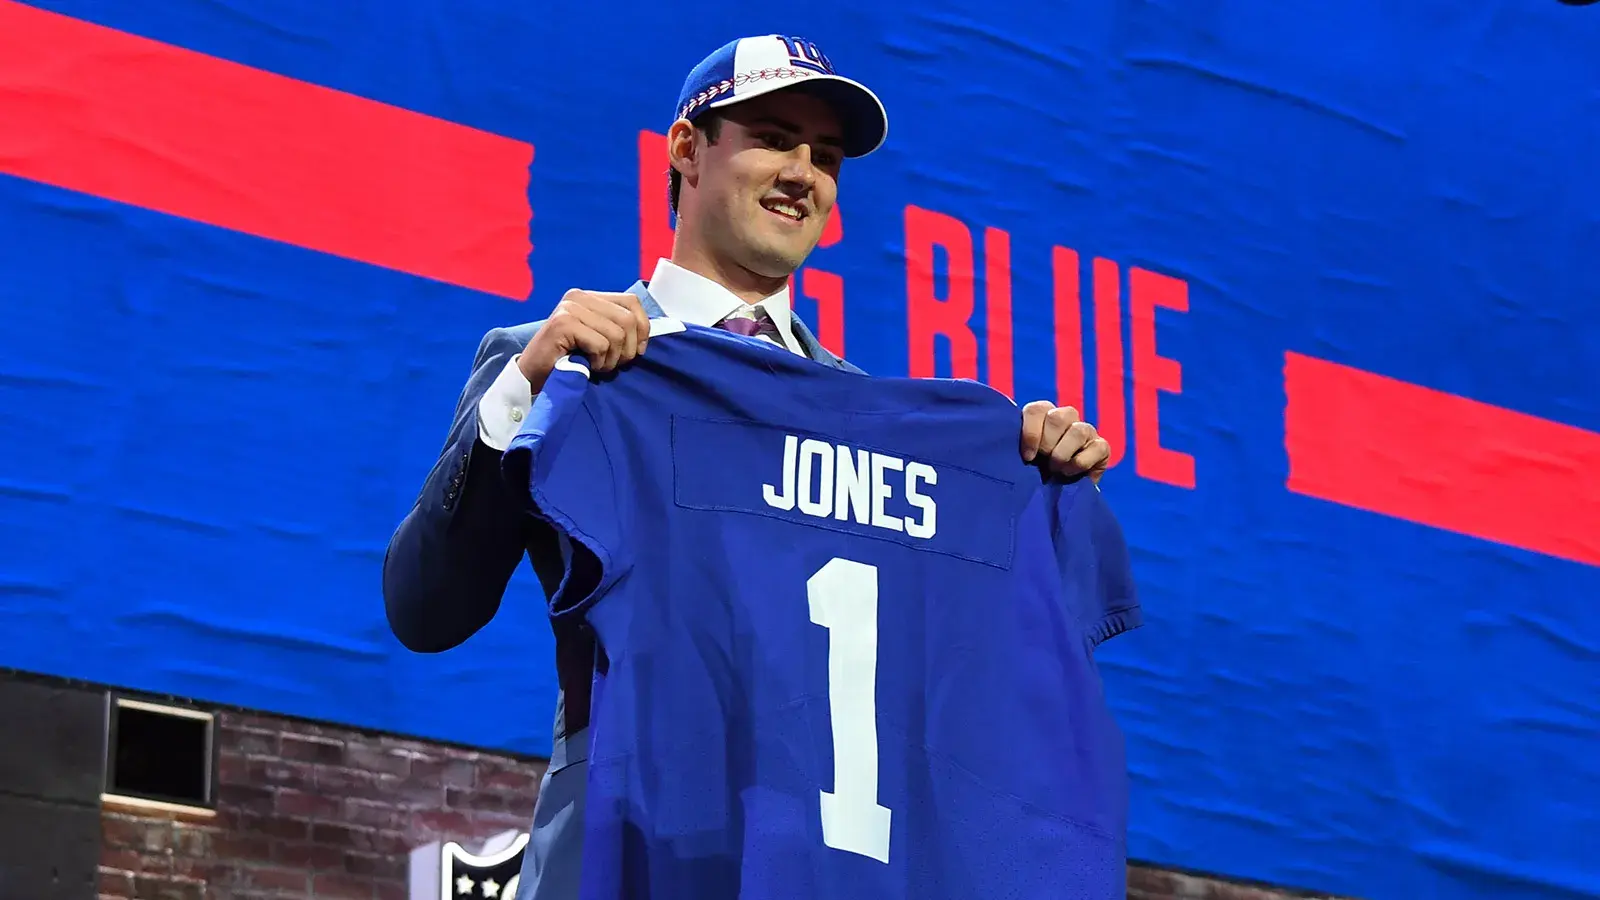 Daniel Jones is selected as the No. 6 overall pick to the New York Giants in the first round of the 2019 NFL Draft in Downtown Nashville. / Christopher Hanewinckel/USA TODAY Sports